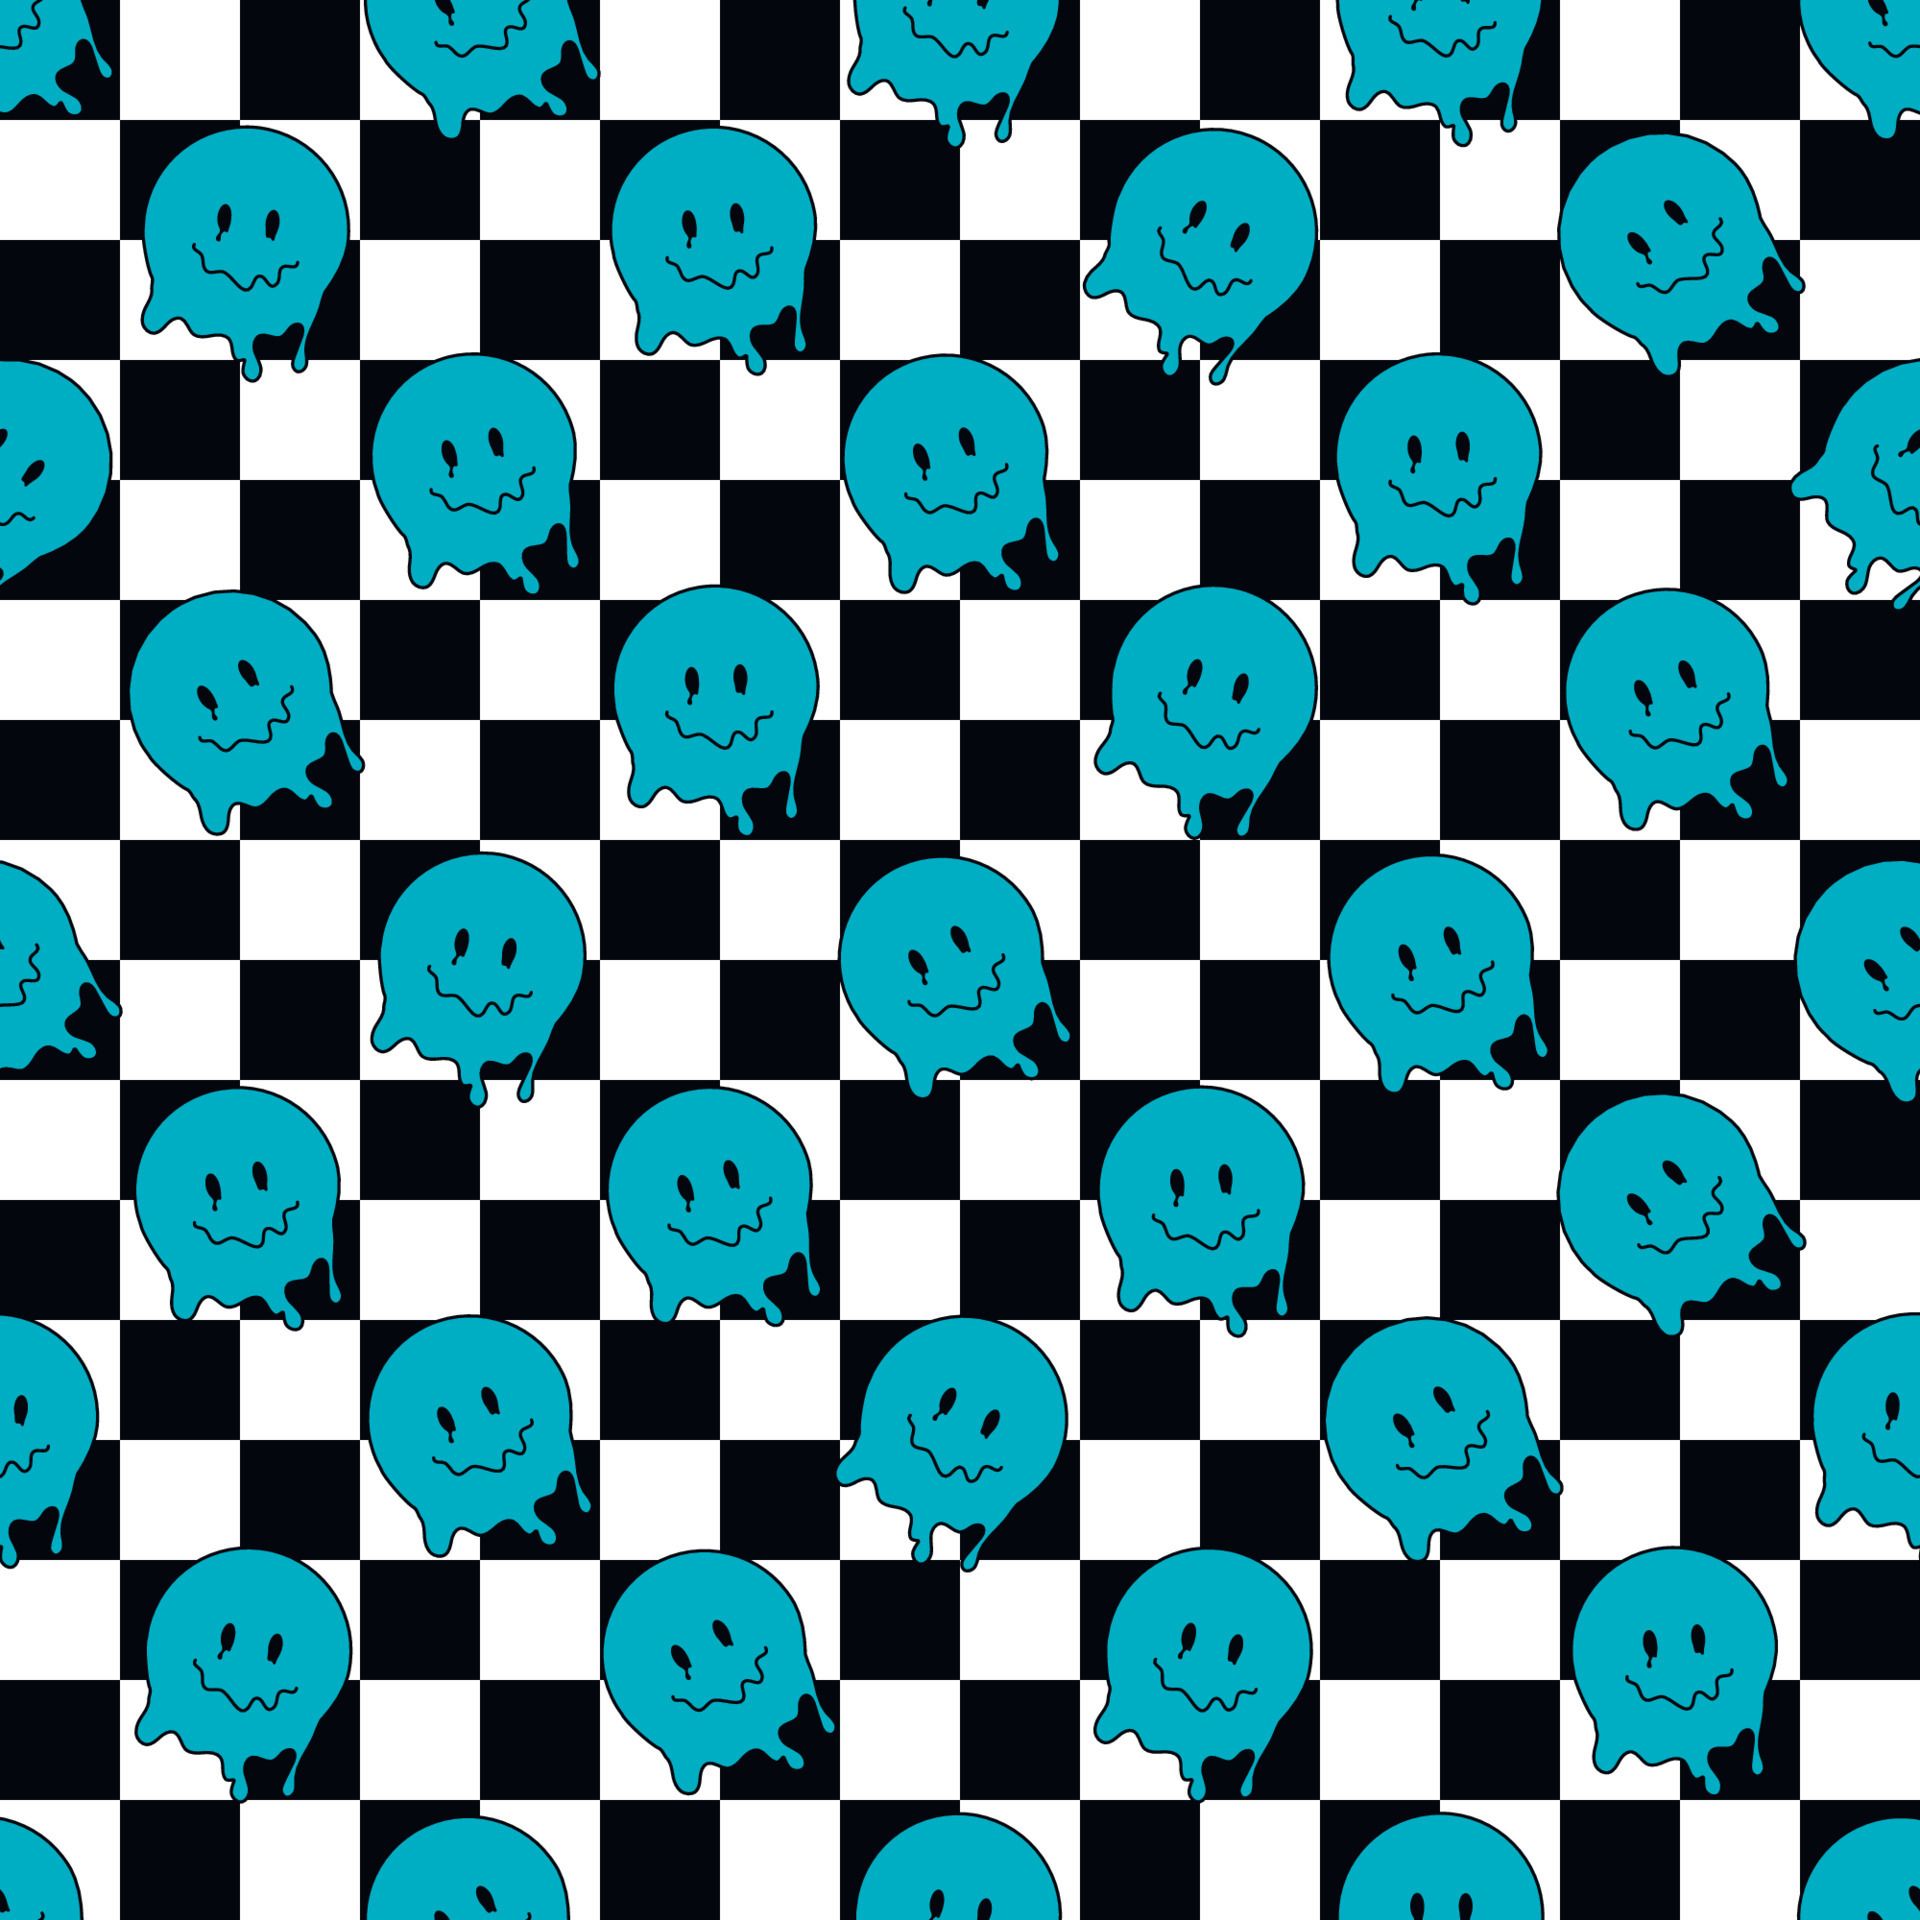 A pattern of blue and black checkered squares with smiling faces - Y2K, smile, funny